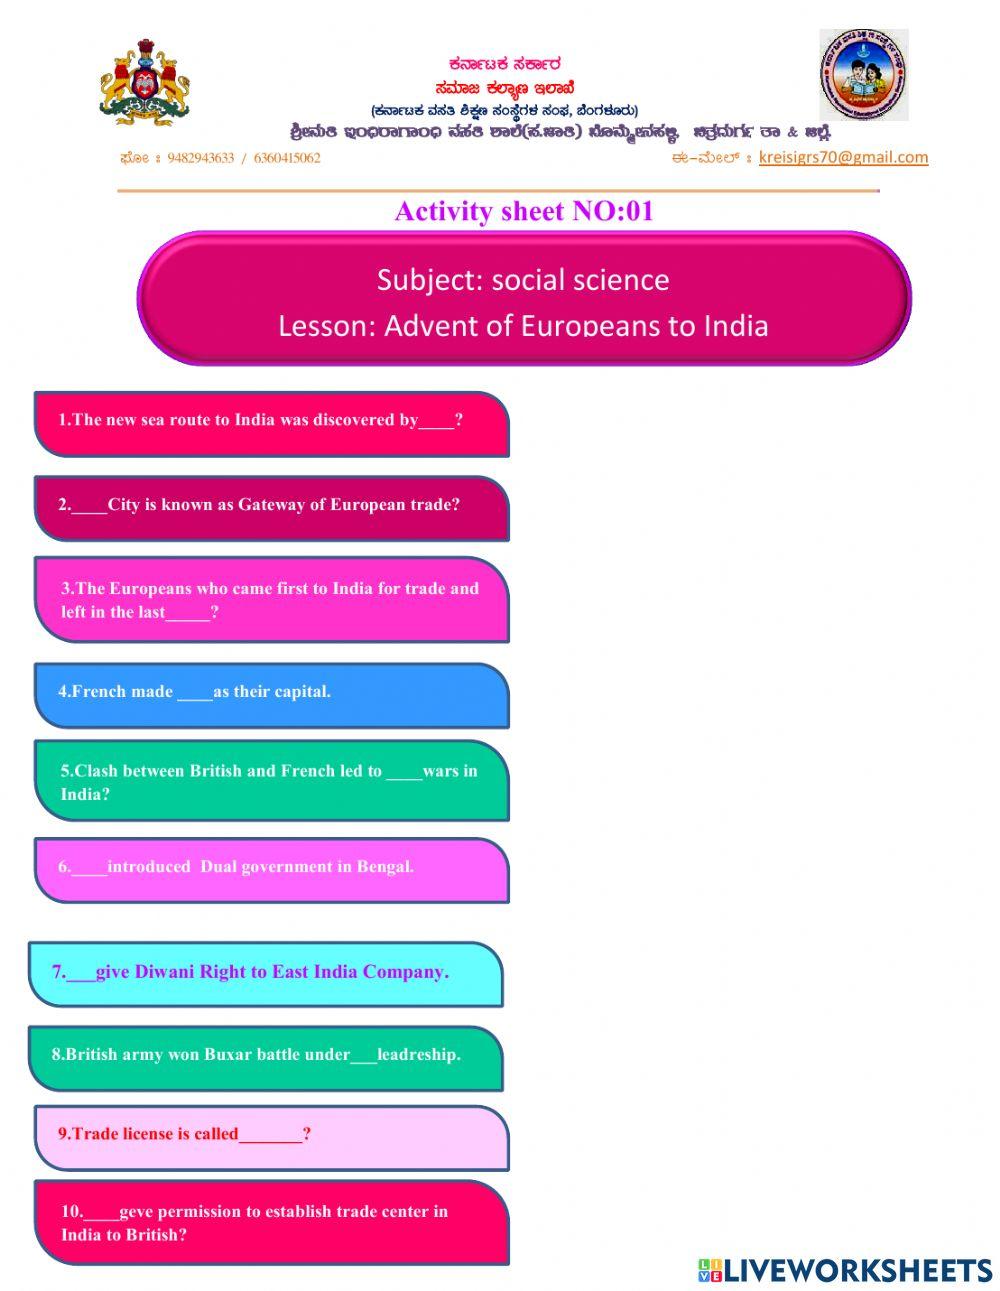 Advent of Europeans to India-ACTIVITY 1.1